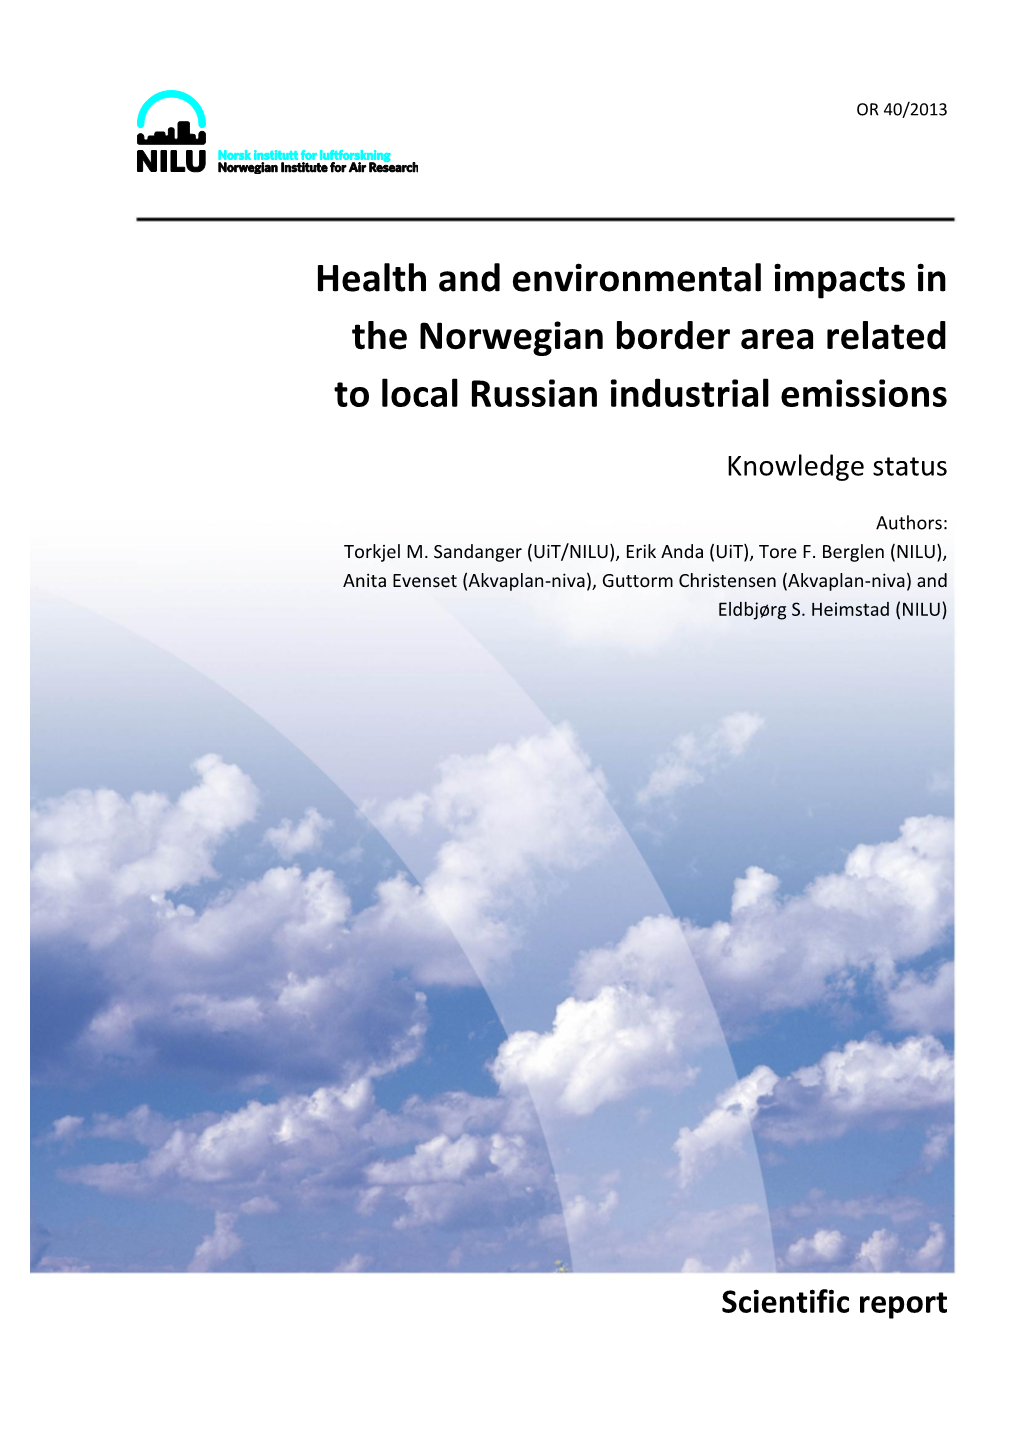 Health and Environmental Impacts in the Norwegian Border Area Related to Local Russian Industrial Emissions